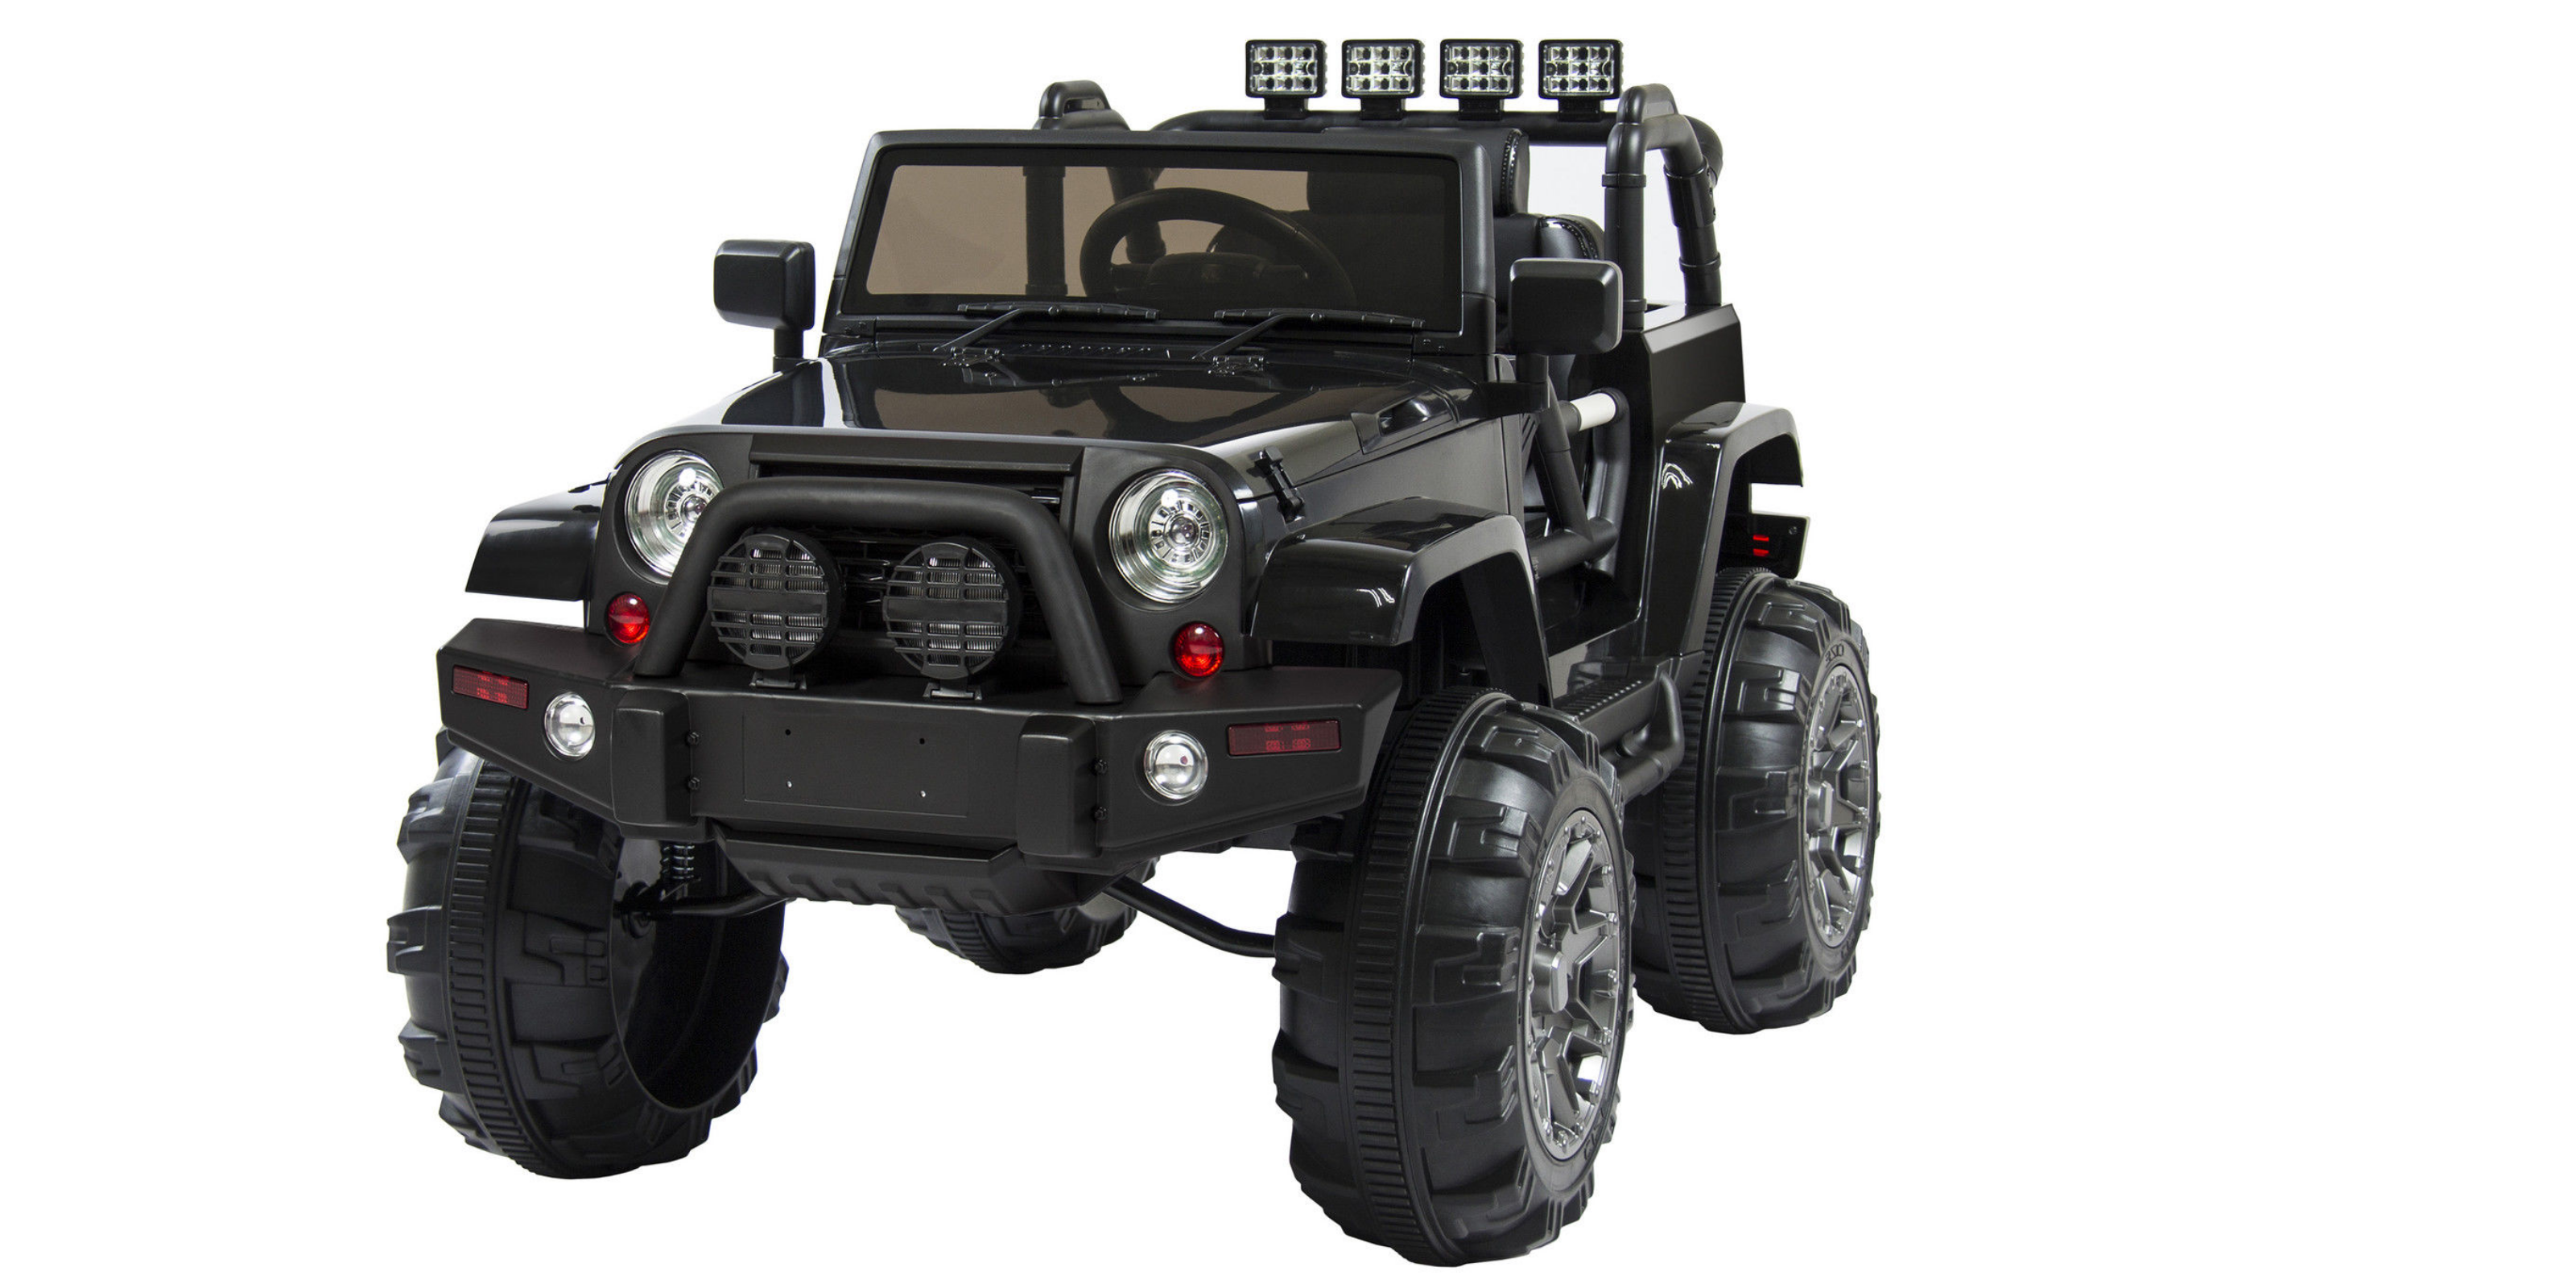 12V Ride On Truck Toy Down to $199.99 + Free Shipping!